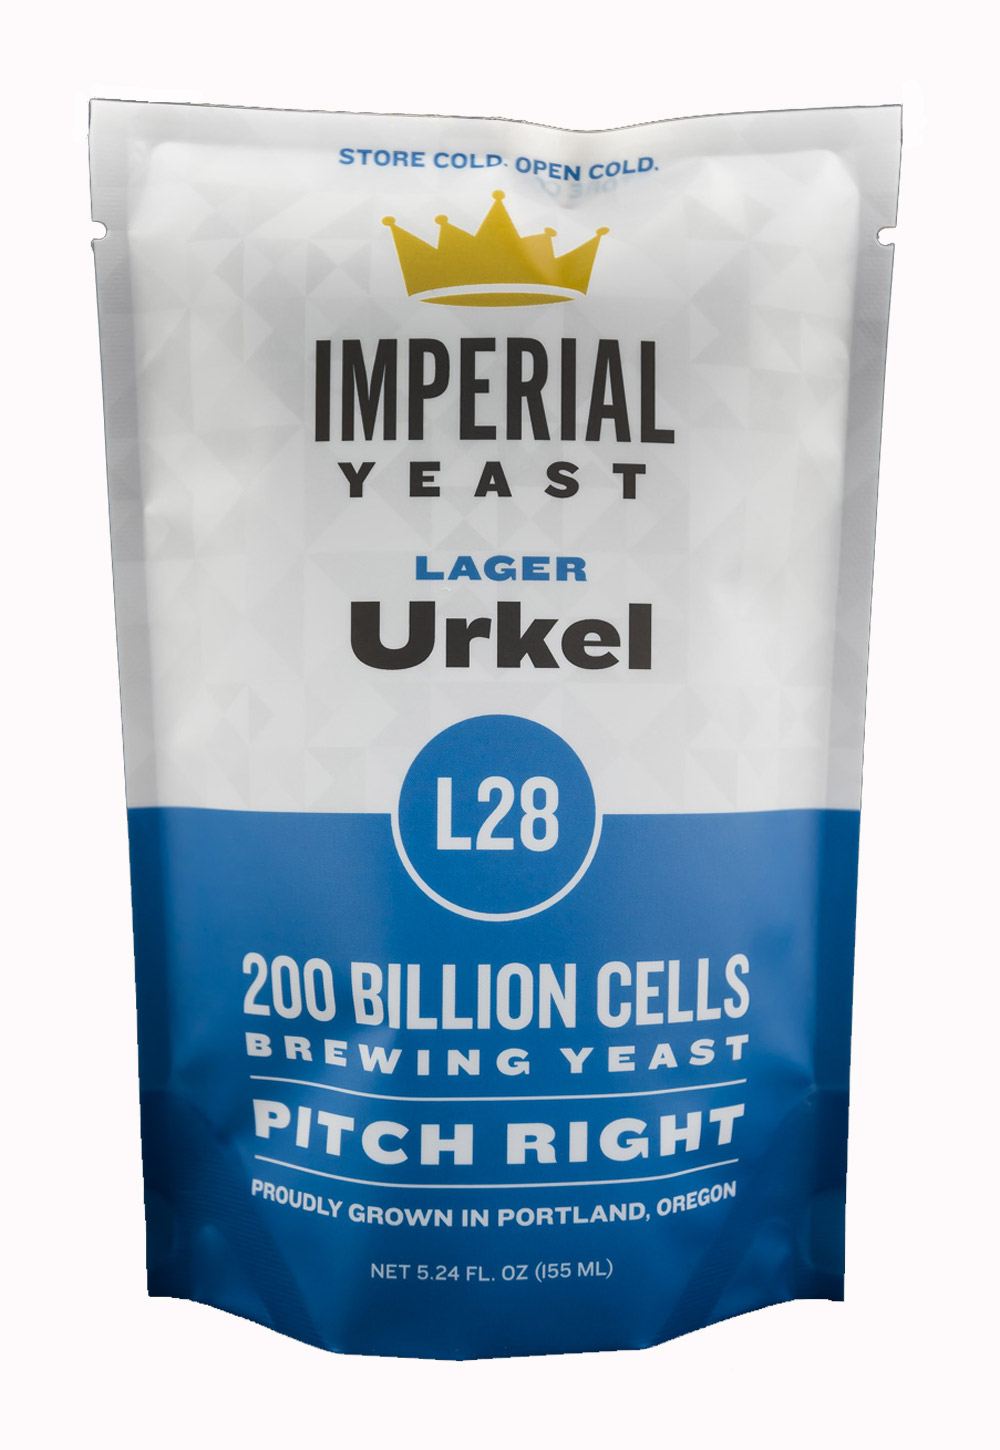 L28 Urkel Lager Yeast from Imperial Yeast